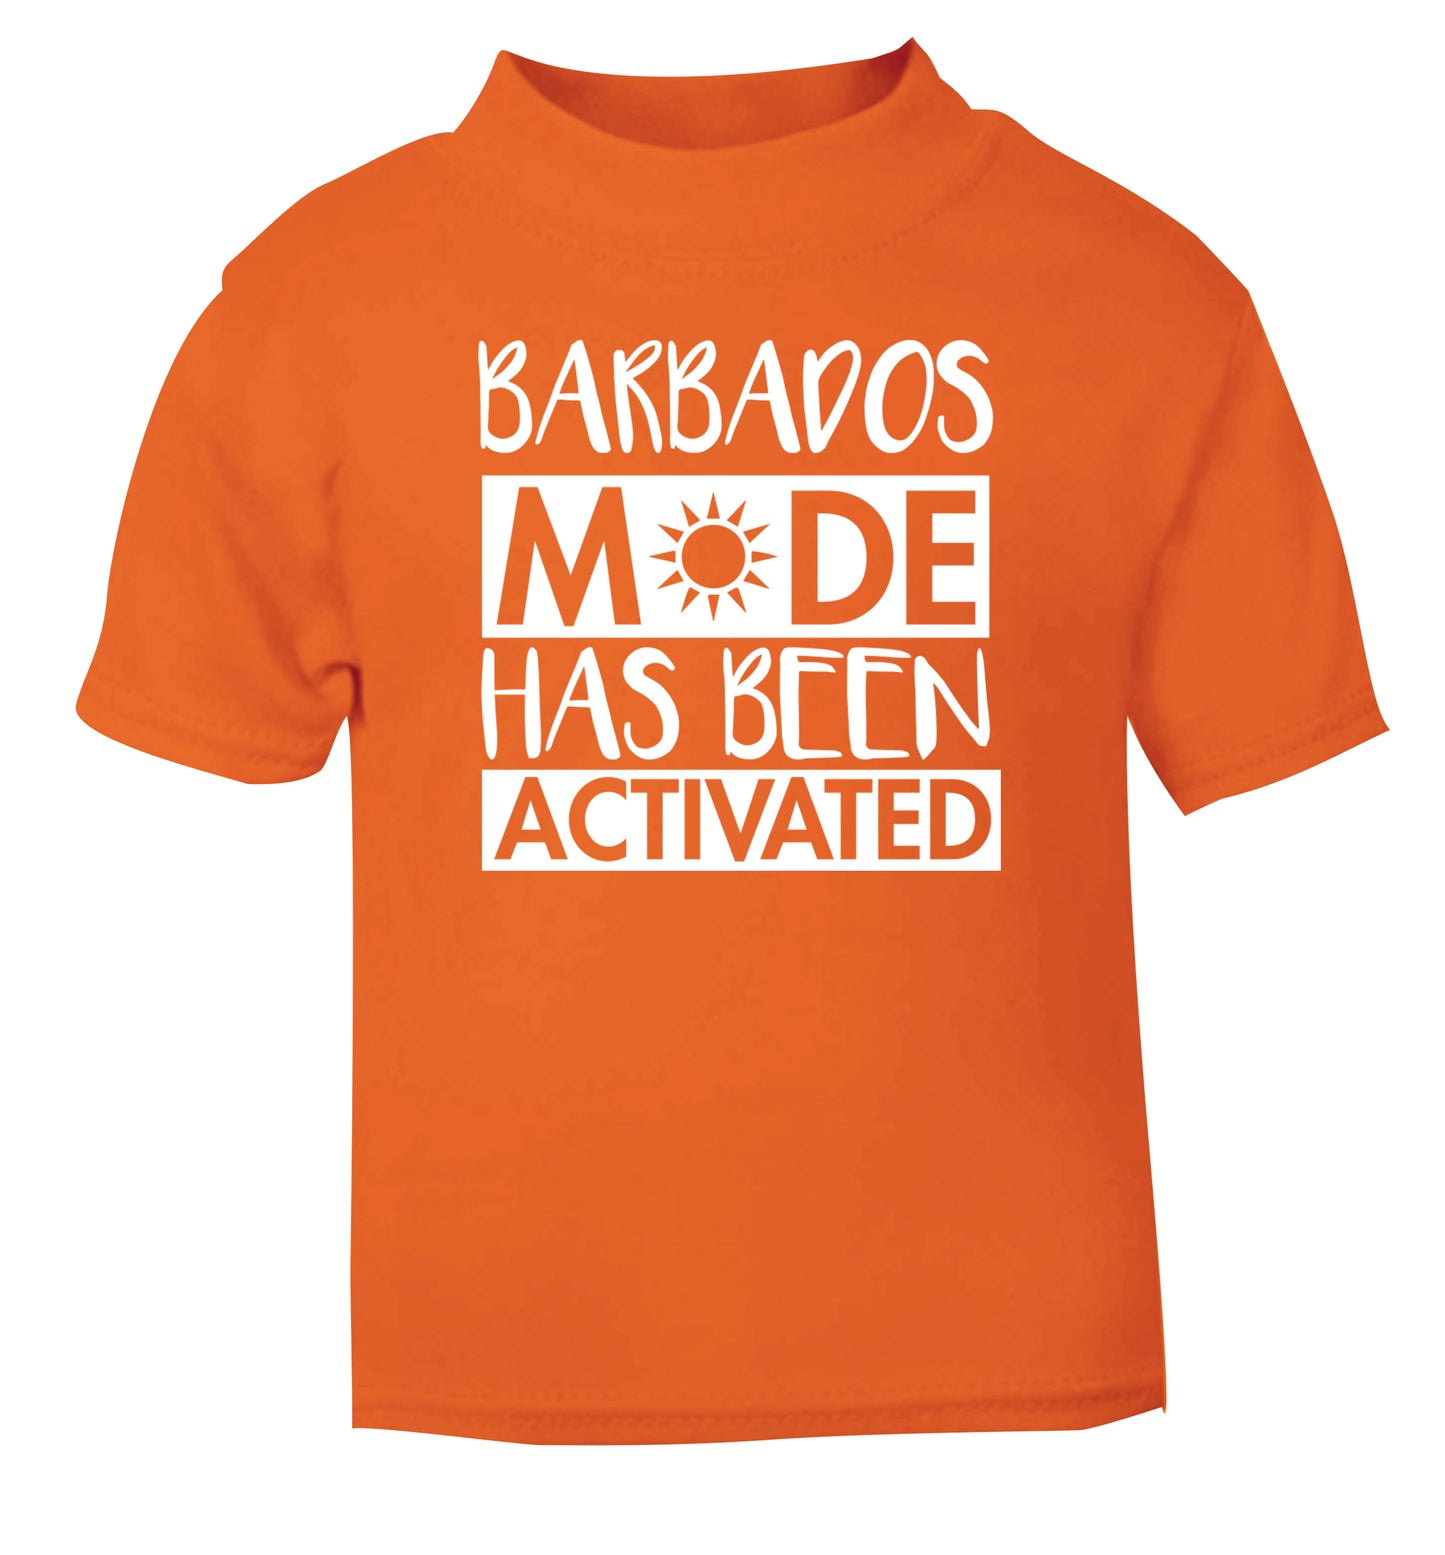 Barbados mode has been activated orange Baby Toddler Tshirt 2 Years